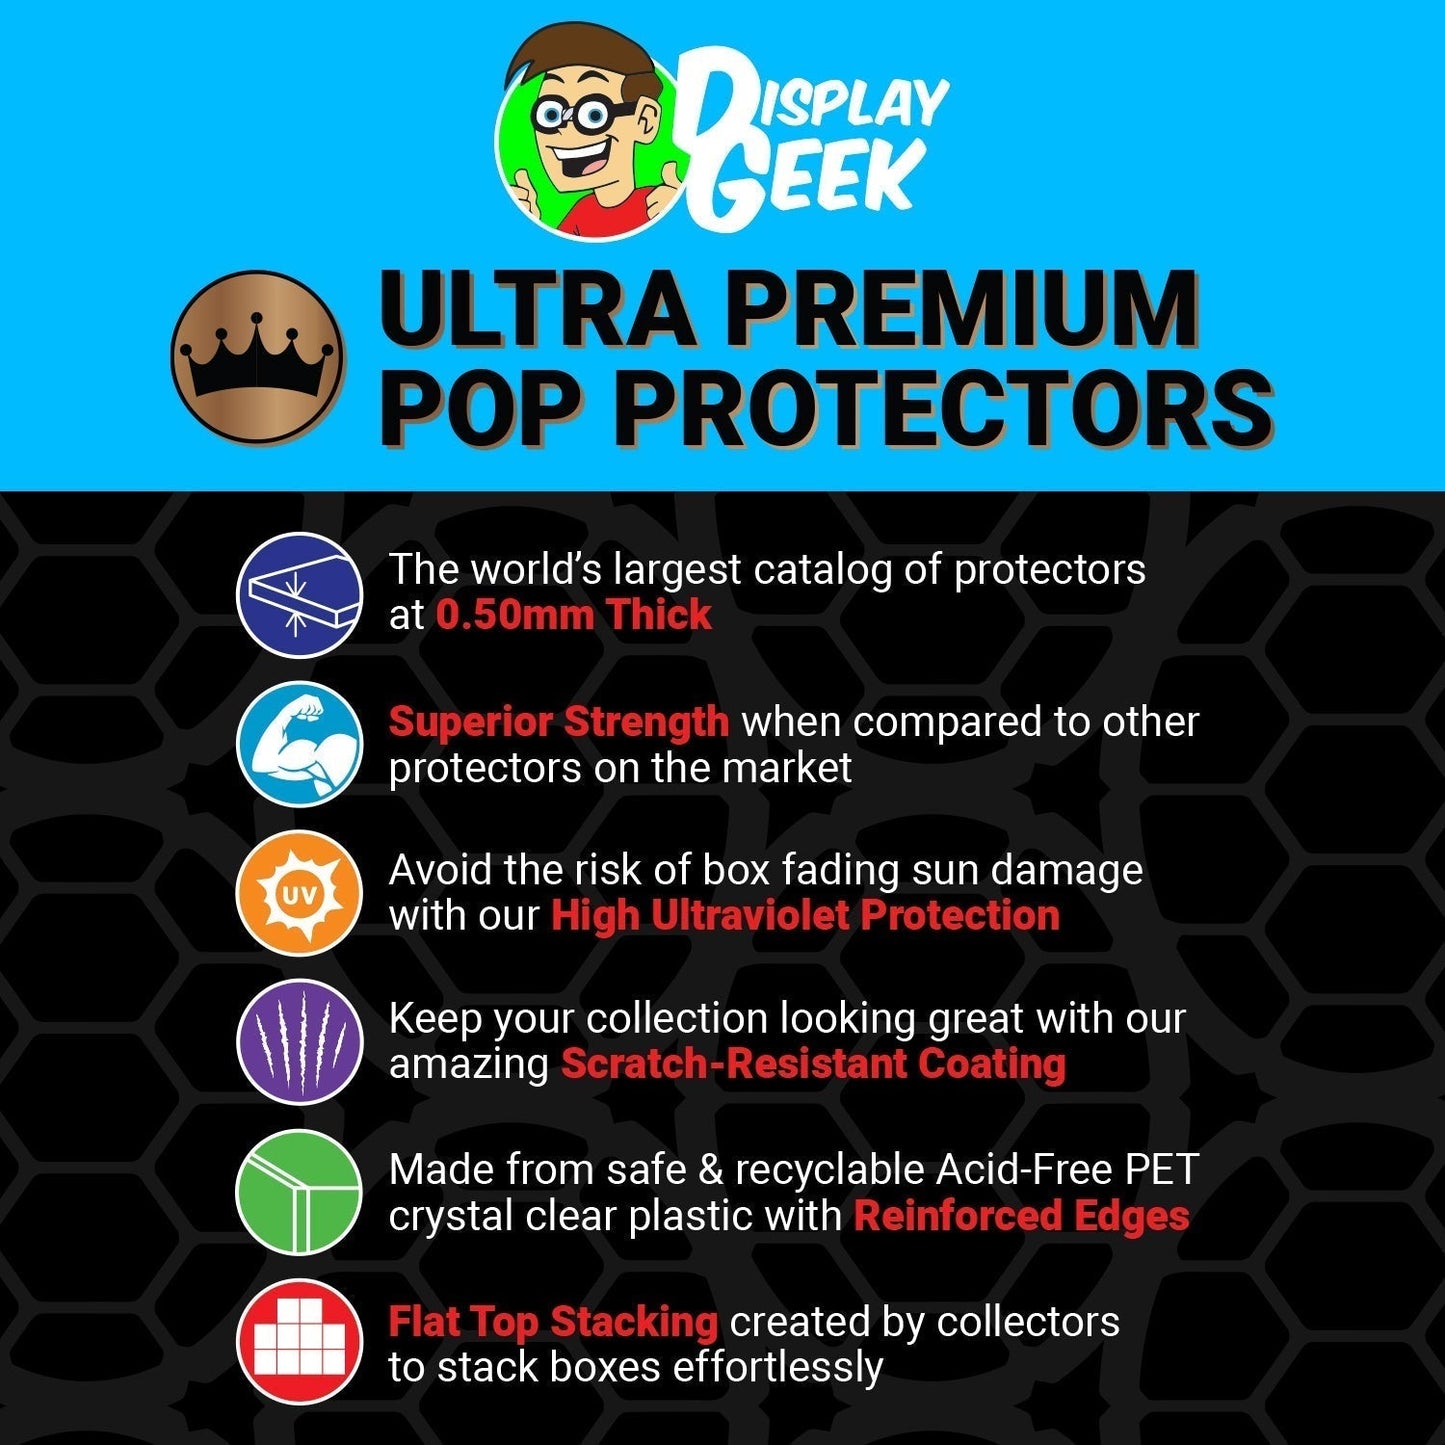 Pop Protector for 3 Pack Godzilla, Mechagodzilla & Kong BAM Funko Pop - PPG Pop Protector Guide Search Created by Display Geek